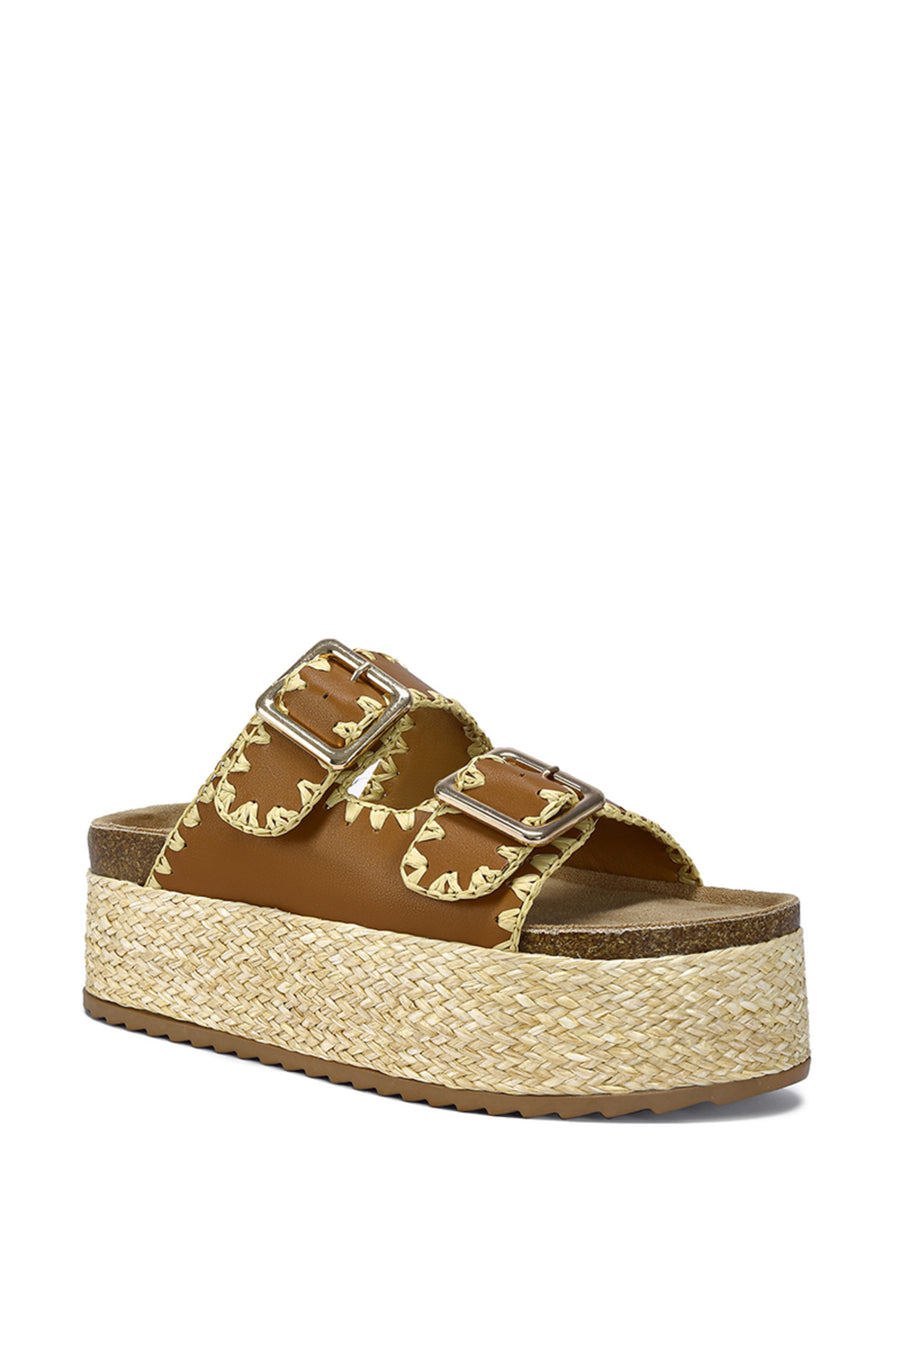 brown platform flat sandals with braided raffia along the sole and buckled double straps